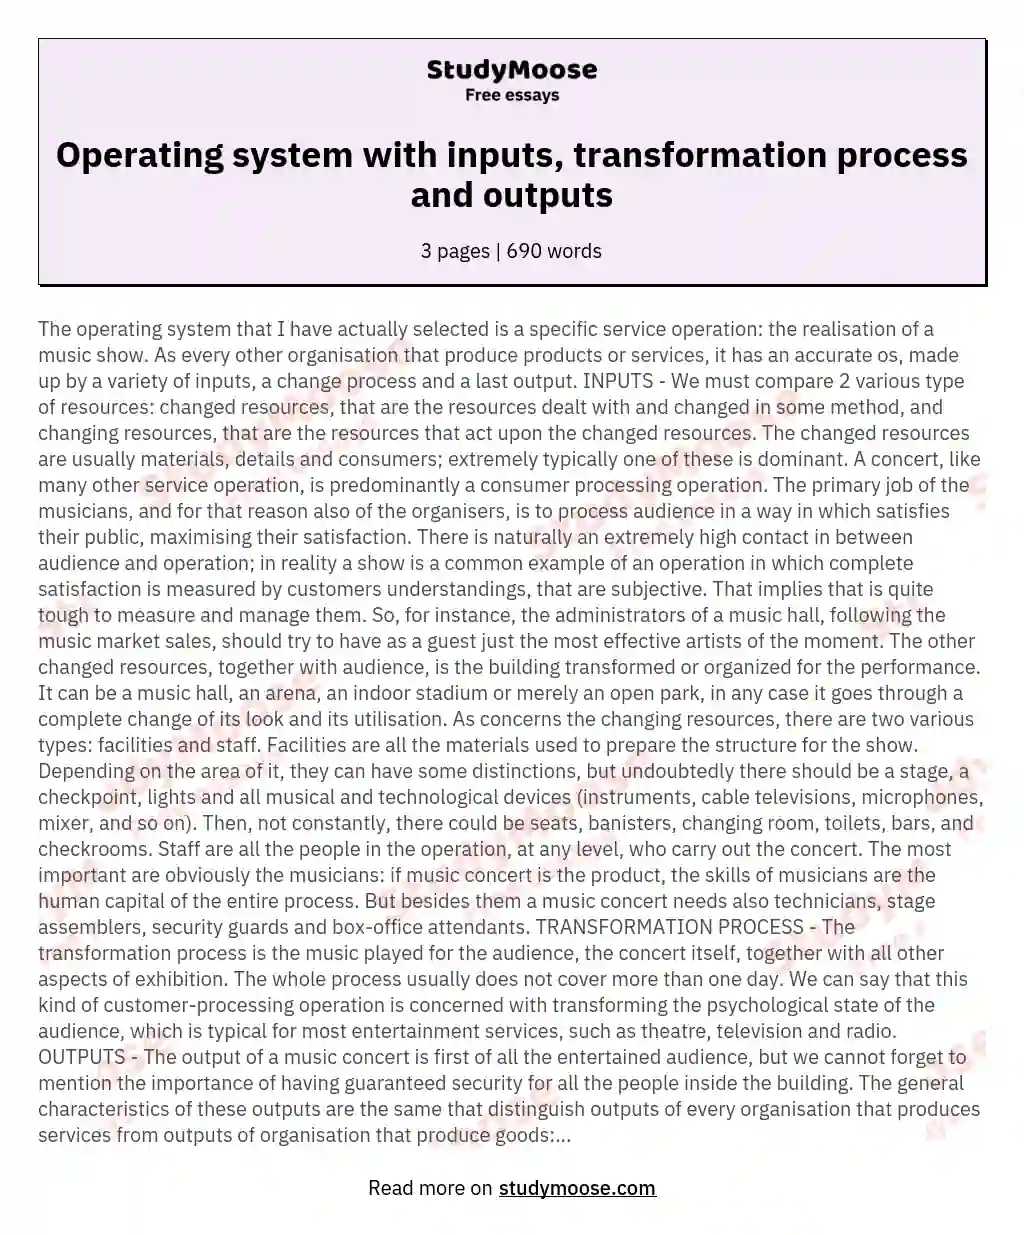 Operating system with inputs, transformation process and outputs essay